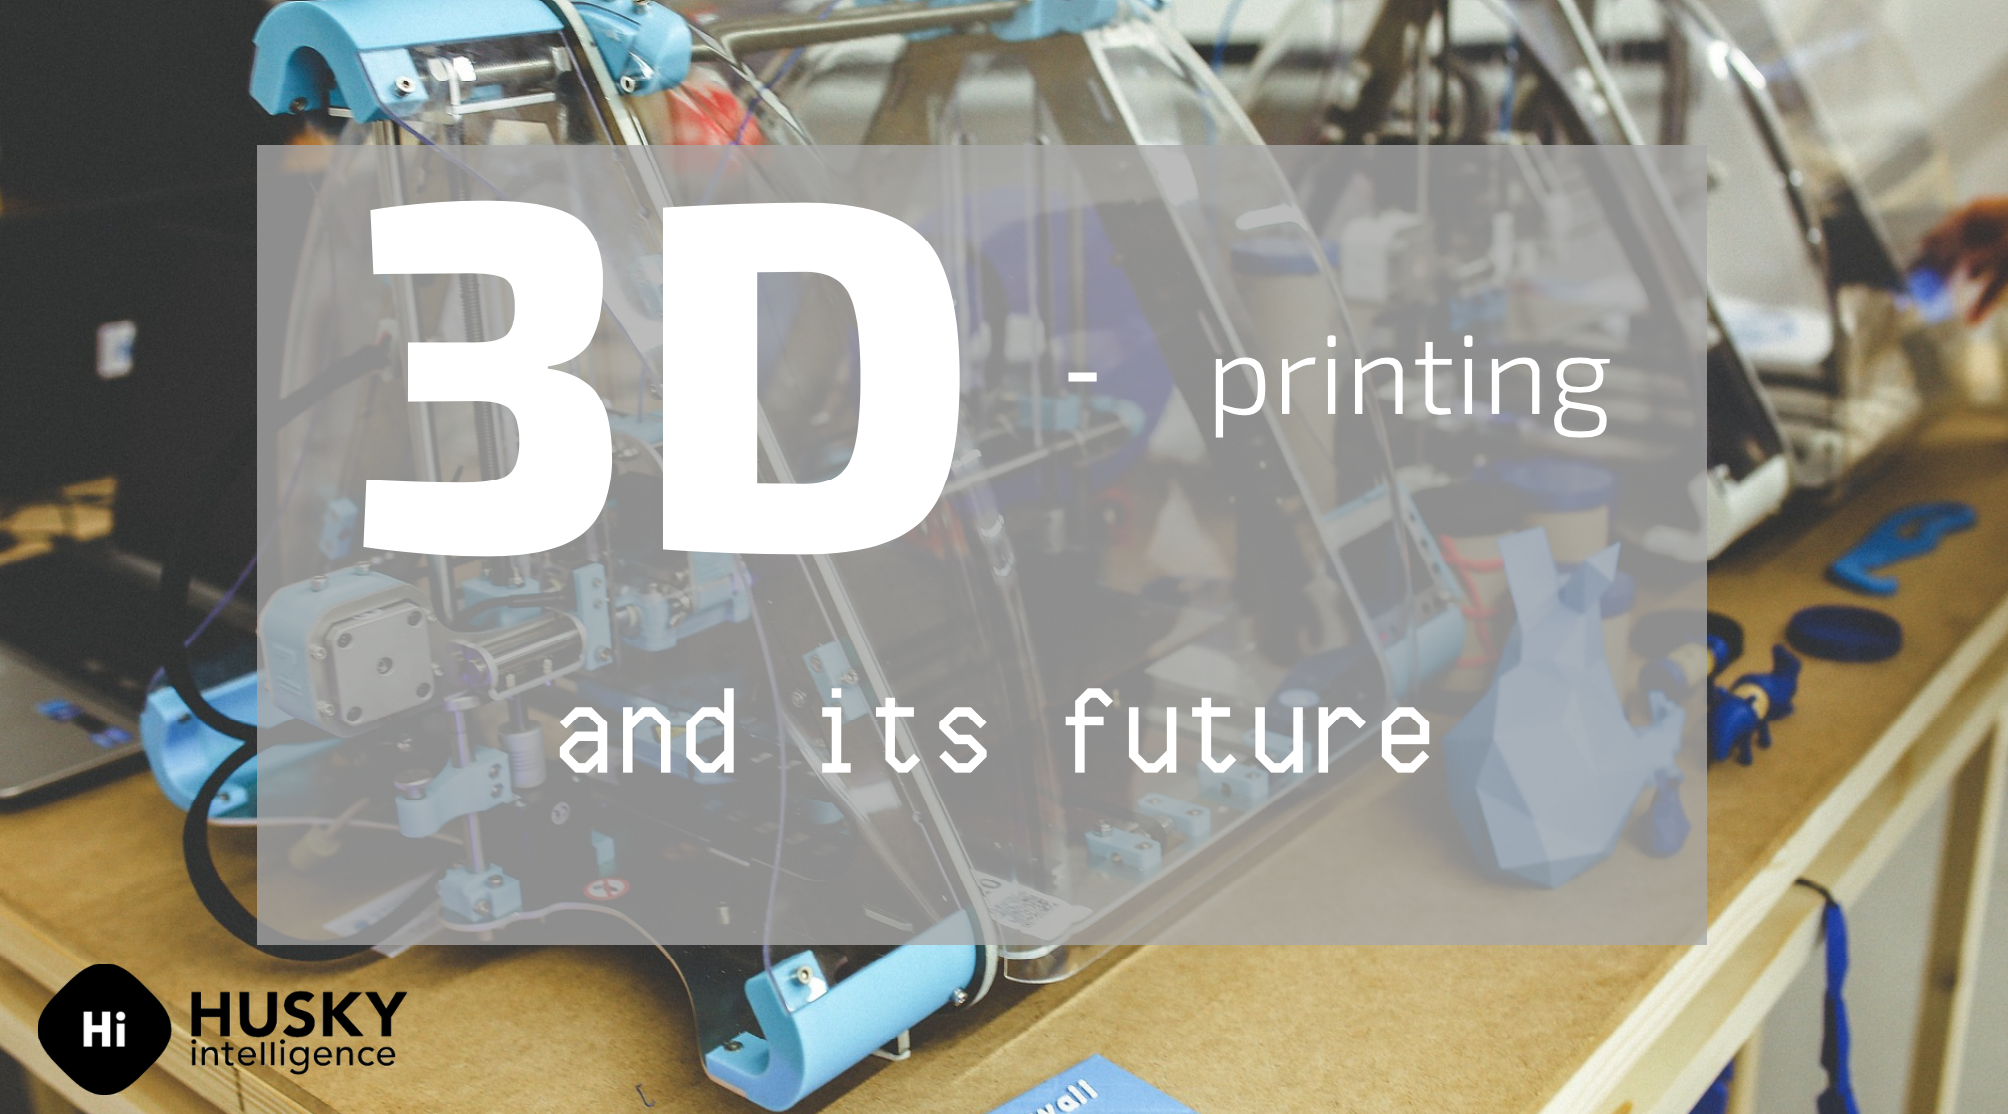 The future of 3D printing